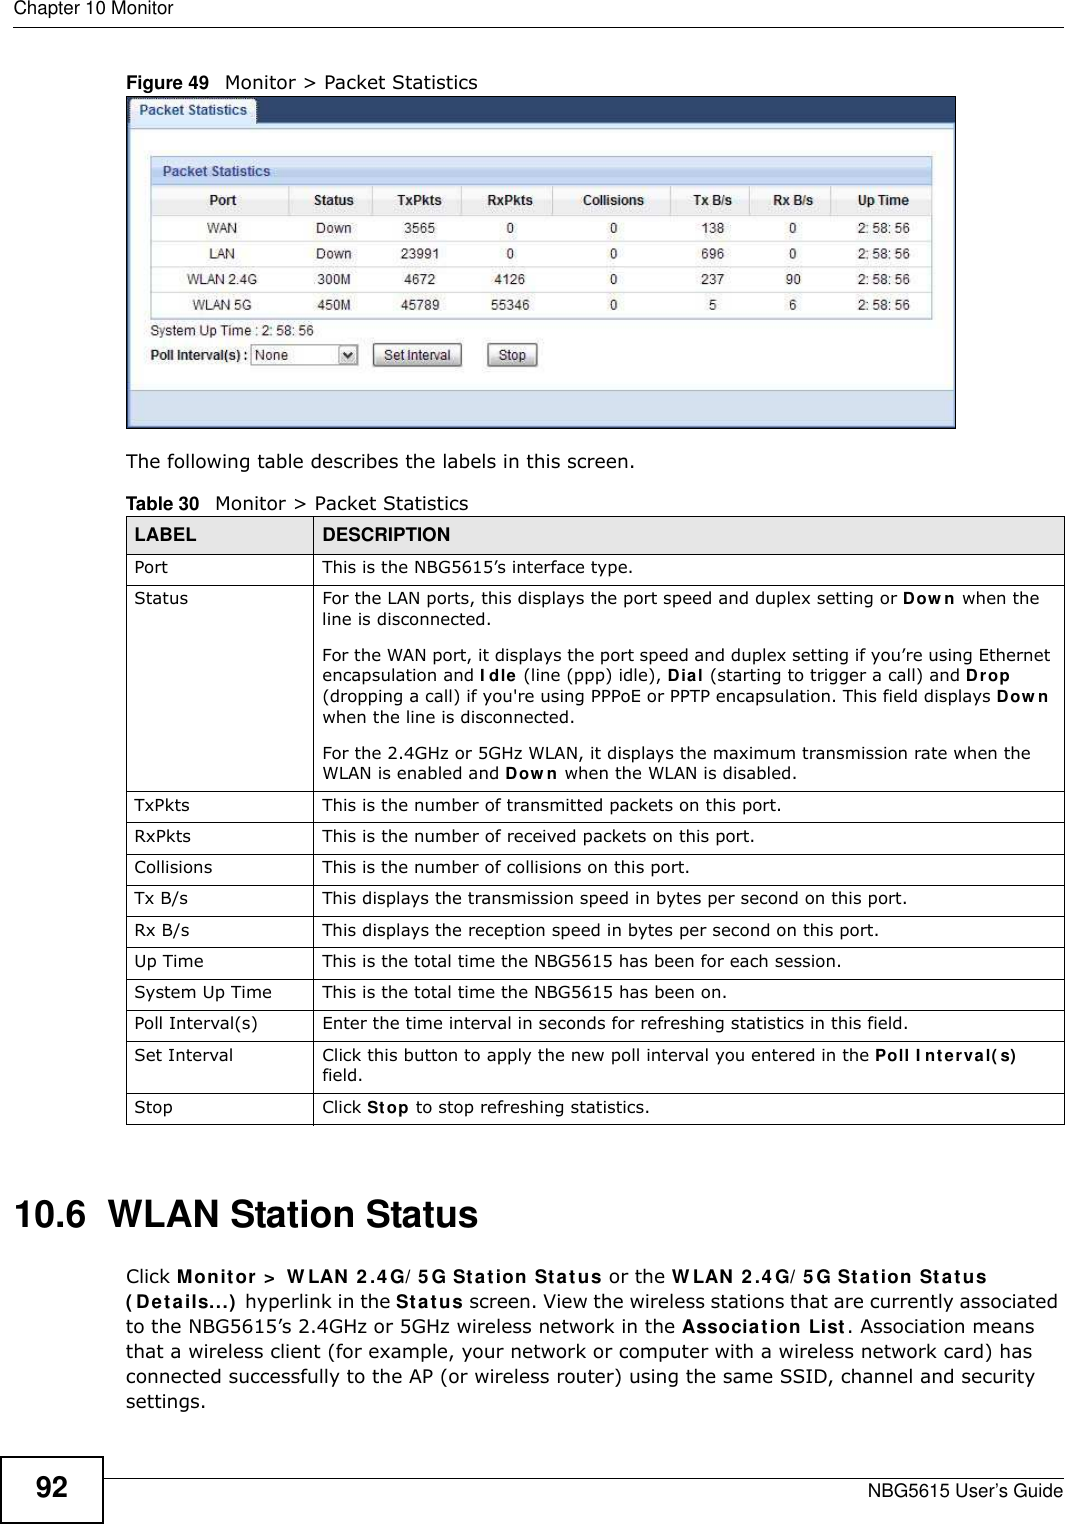 Chapter 10 MonitorNBG5615 User’s Guide92Figure 49   Monitor &gt; Packet Statistics The following table describes the labels in this screen.10.6  WLAN Station Status     Click Monitor &gt;  W LAN 2 .4 G/ 5G Station Status or the W LAN 2 .4 G/ 5G Station Status ( Details...)  hyperlink in the Status screen. View the wireless stations that are currently associated to the NBG5615’s 2.4GHz or 5GHz wireless network in the Association List. Association means that a wireless client (for example, your network or computer with a wireless network card) has connected successfully to the AP (or wireless router) using the same SSID, channel and security settings.Table 30   Monitor &gt; Packet StatisticsLABEL DESCRIPTIONPort This is the NBG5615’s interface type.Status  For the LAN ports, this displays the port speed and duplex setting or Dow n when the line is disconnected.For the WAN port, it displays the port speed and duplex setting if you’re using Ethernet encapsulation and I dle (line (ppp) idle), Dial (starting to trigger a call) and Drop (dropping a call) if you&apos;re using PPPoE or PPTP encapsulation. This field displays Dow n when the line is disconnected.For the 2.4GHz or 5GHz WLAN, it displays the maximum transmission rate when the WLAN is enabled and Dow n when the WLAN is disabled.TxPkts  This is the number of transmitted packets on this port.RxPkts  This is the number of received packets on this port.Collisions  This is the number of collisions on this port.Tx B/s  This displays the transmission speed in bytes per second on this port.Rx B/s This displays the reception speed in bytes per second on this port.Up Time This is the total time the NBG5615 has been for each session.System Up Time This is the total time the NBG5615 has been on.Poll Interval(s) Enter the time interval in seconds for refreshing statistics in this field.Set Interval Click this button to apply the new poll interval you entered in the Poll I nterval( s)  field.Stop Click Stop to stop refreshing statistics.